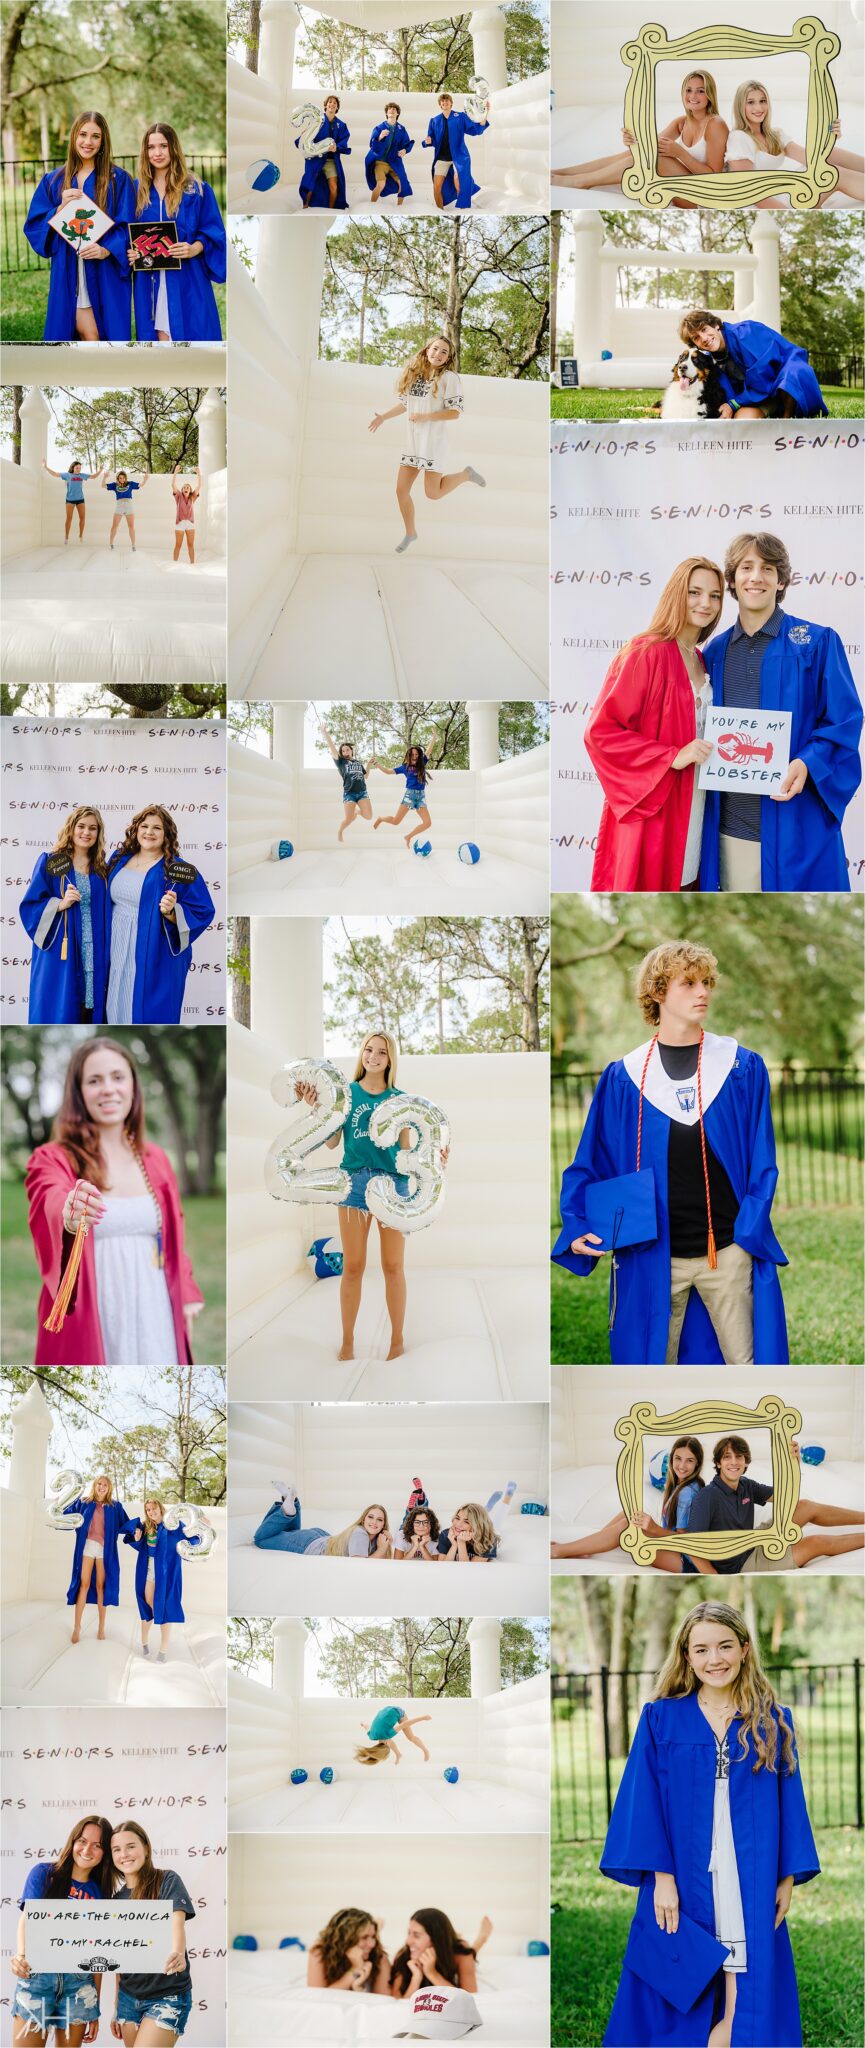 Cap and gown photos in Jacskonville Florida in a white bounce house